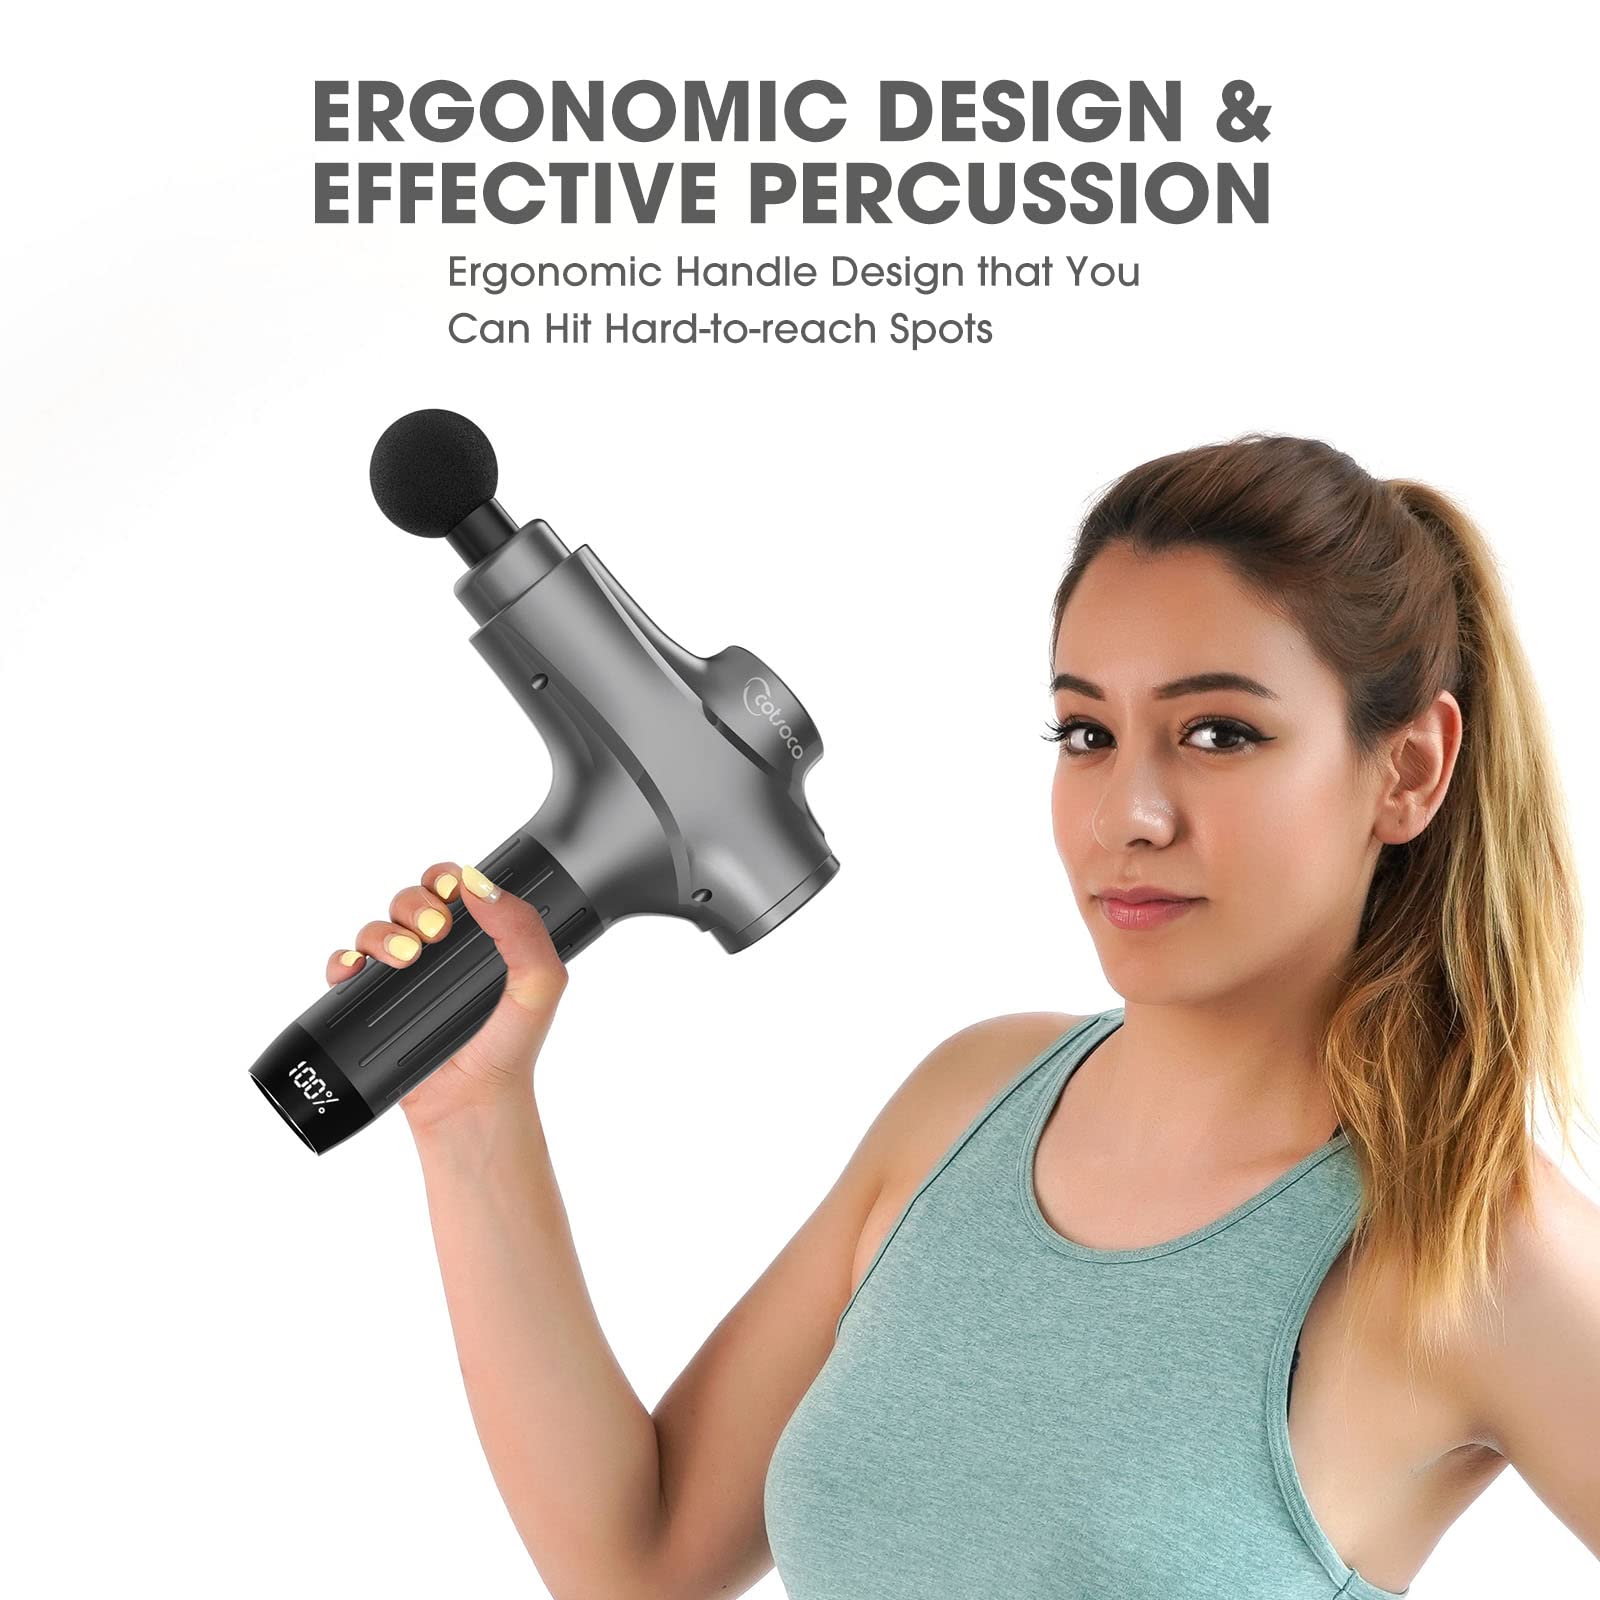 Massage Gun for Athletes,Cotsoco Professional Deep Tissue Massage Gun for  Pain Relief Super Quiet Electric Massager with 10 Massage Heads and 30  Speeds Muscle Vibration Massager-Muscle Massager-DIGITNOW!